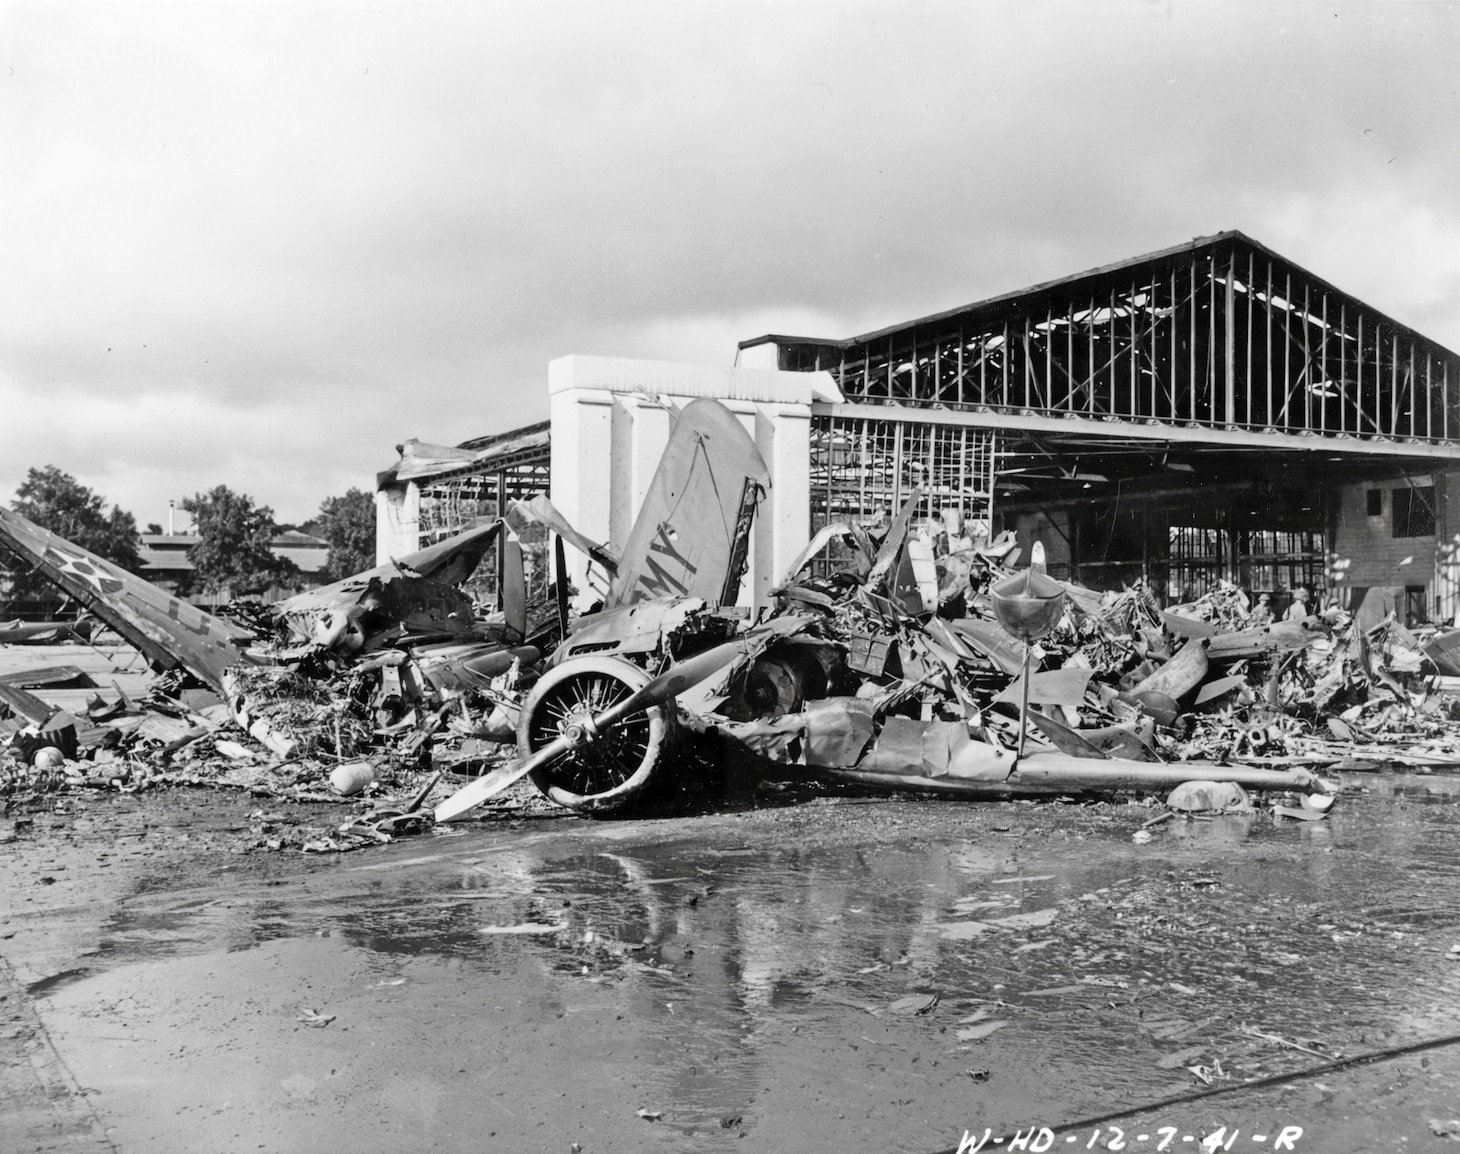 U.S. Army aircraft destroyed by Japanese raiders at Wheeler Air Field. Photographed later in the day on 7 December 1941, following the end of the attacks. Wreckage includes at least one P-40 and a twin-engine amphibian. Note the wrecked hangar in the background.